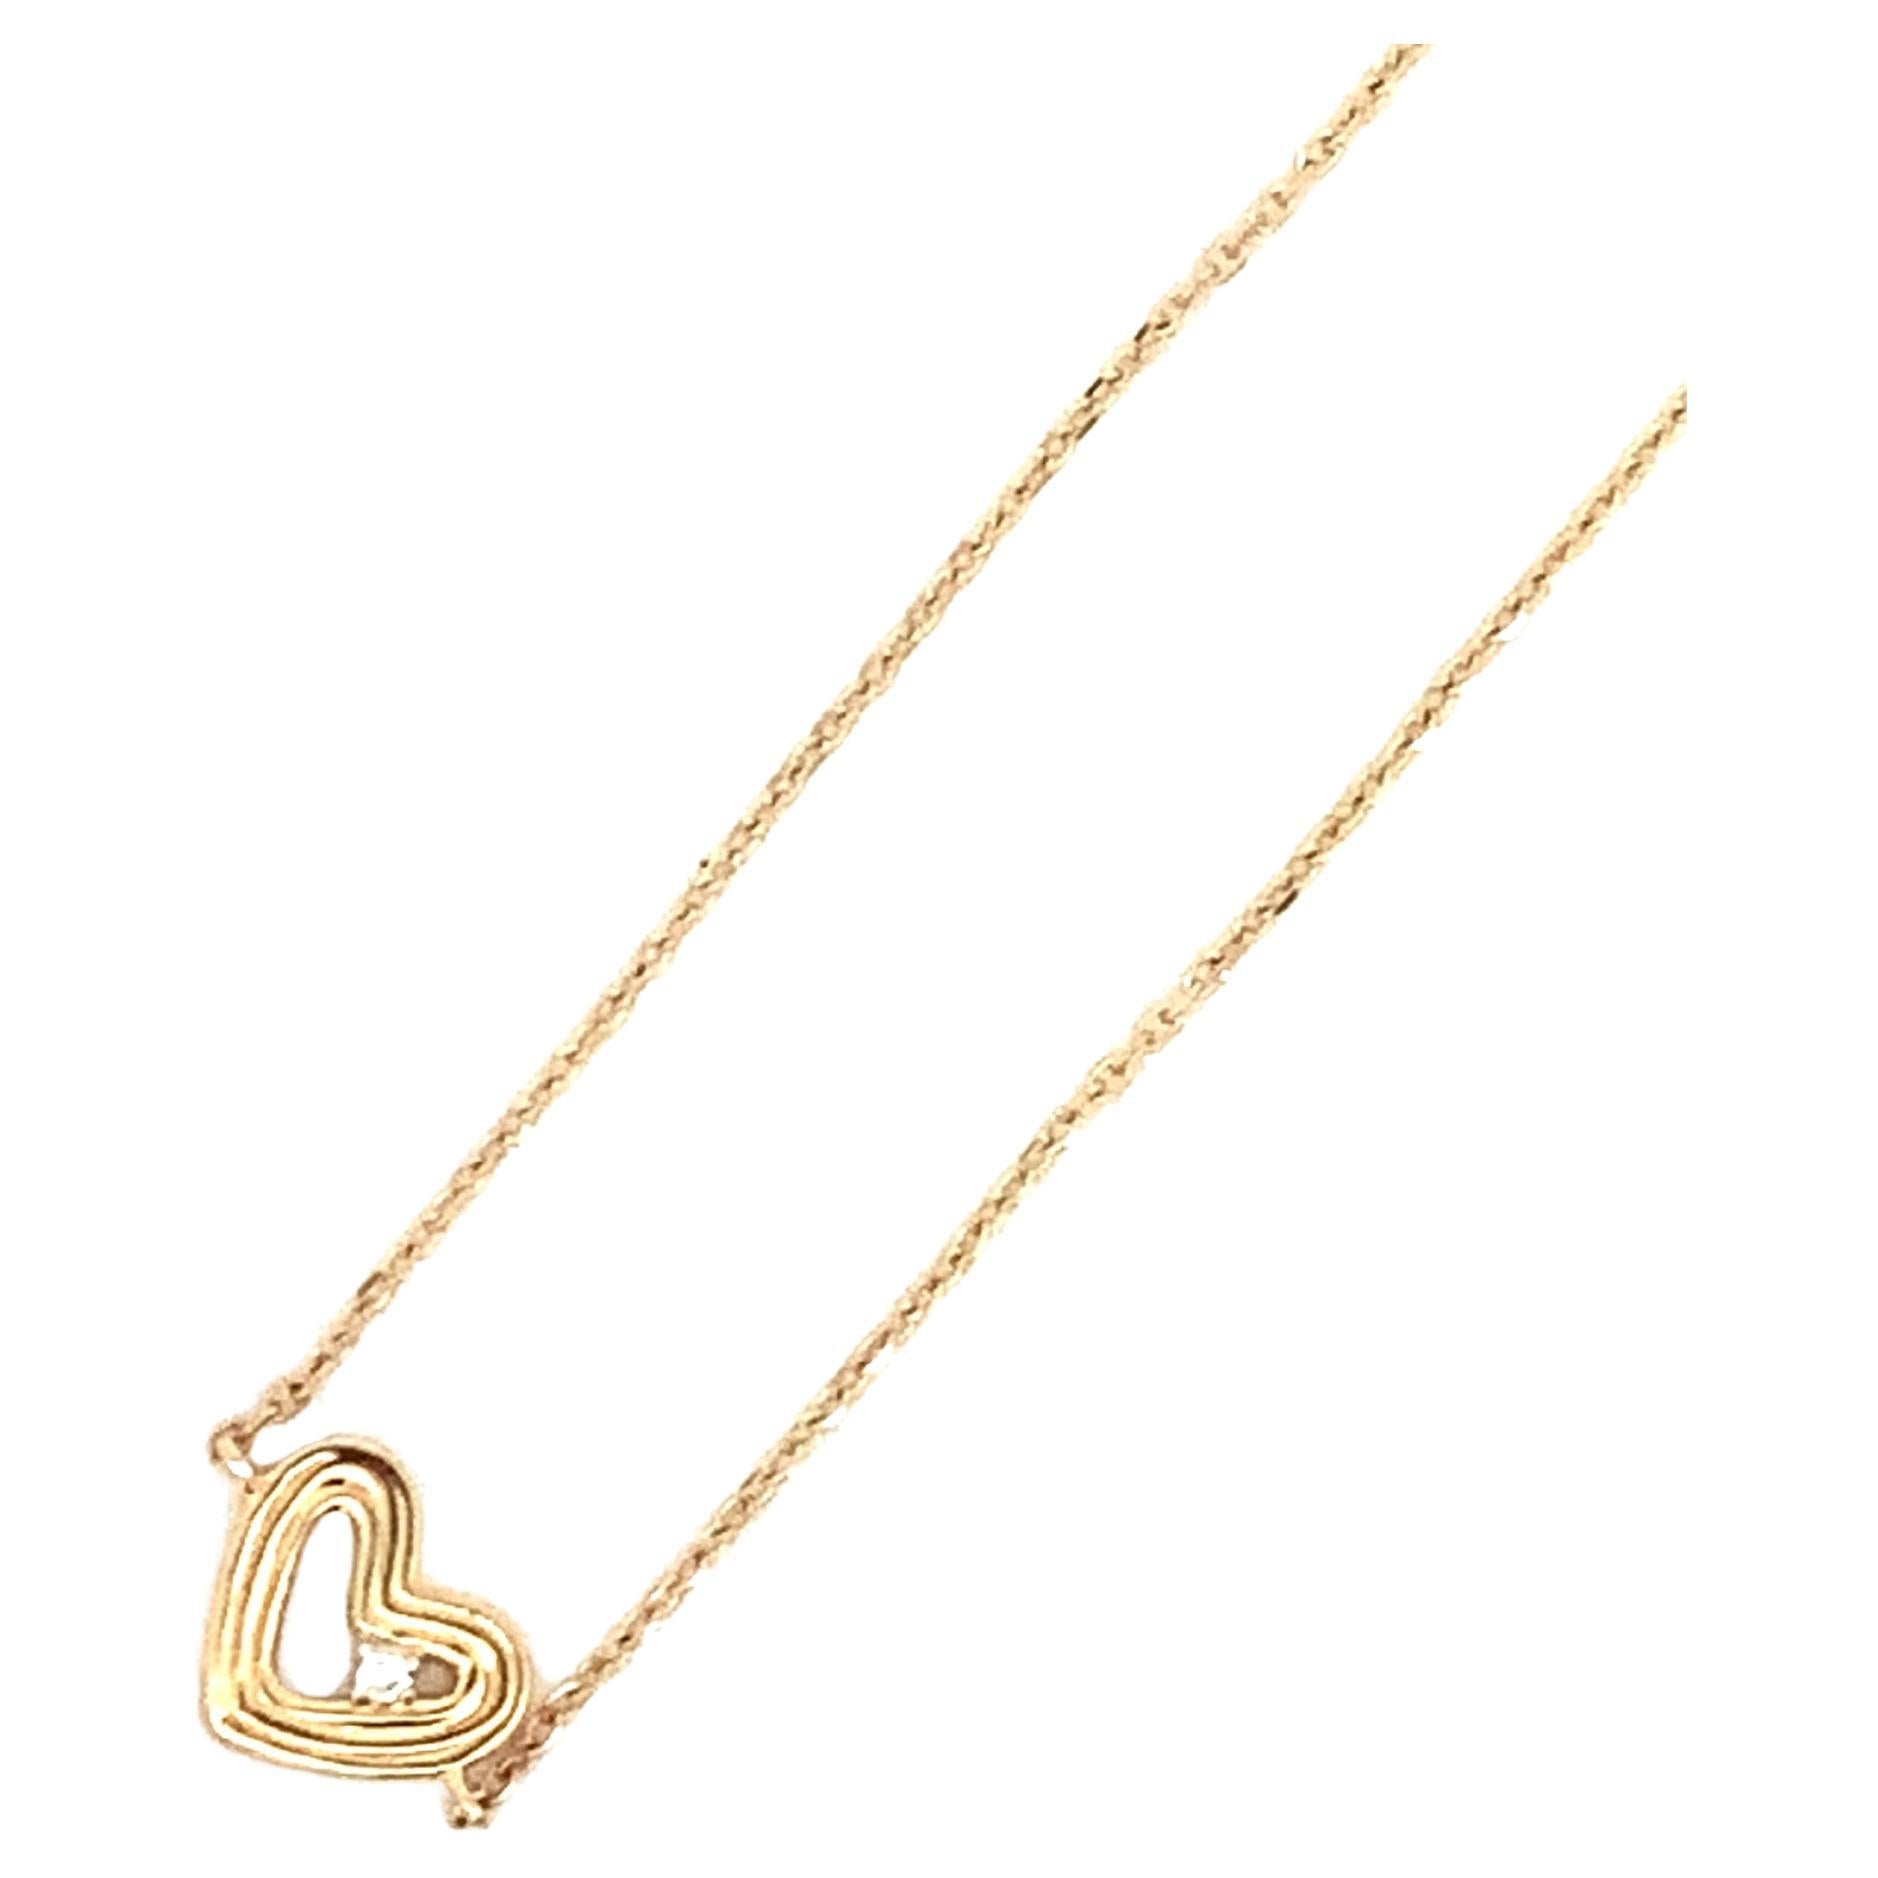 Adina Reyter One of a Kind Groovy Heart Bracelet - Y14

14K yellow gold groovy heart bracelet with prong-set round diamond. 

Measurements: Heart measures 8 mm wide x 7 mm tall. Adjustable chain lengths 6